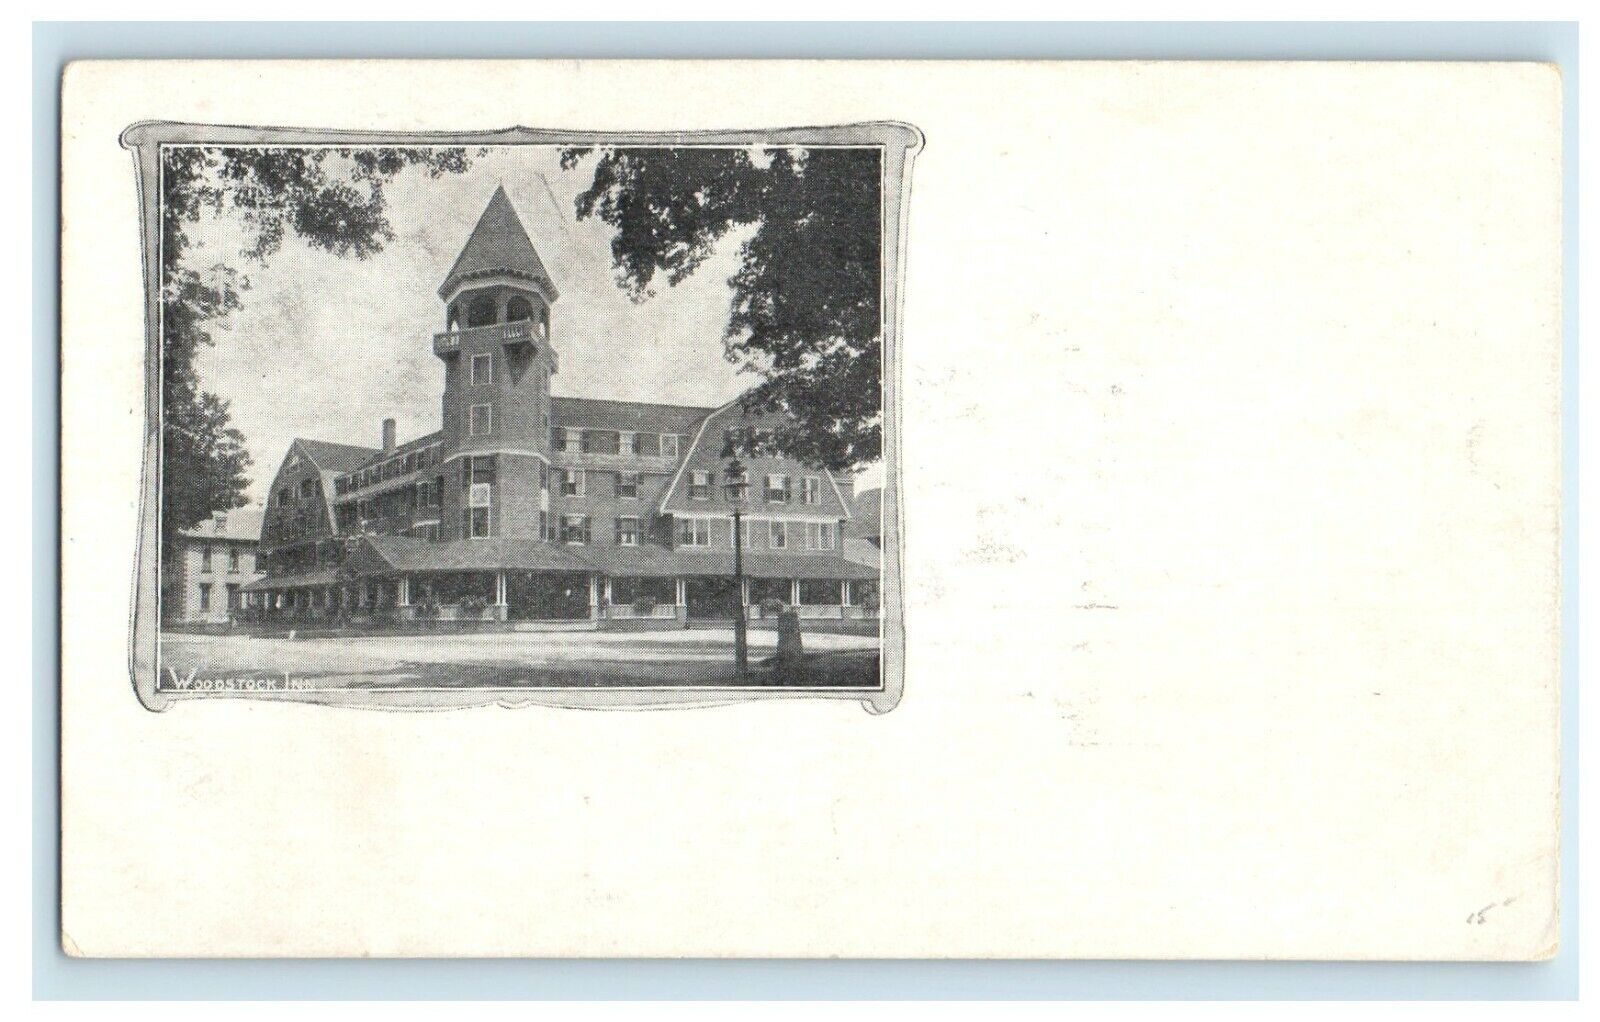 c1900 View Of Woodstock Inn Building Vermont VT Private Mailing Card Postcard  